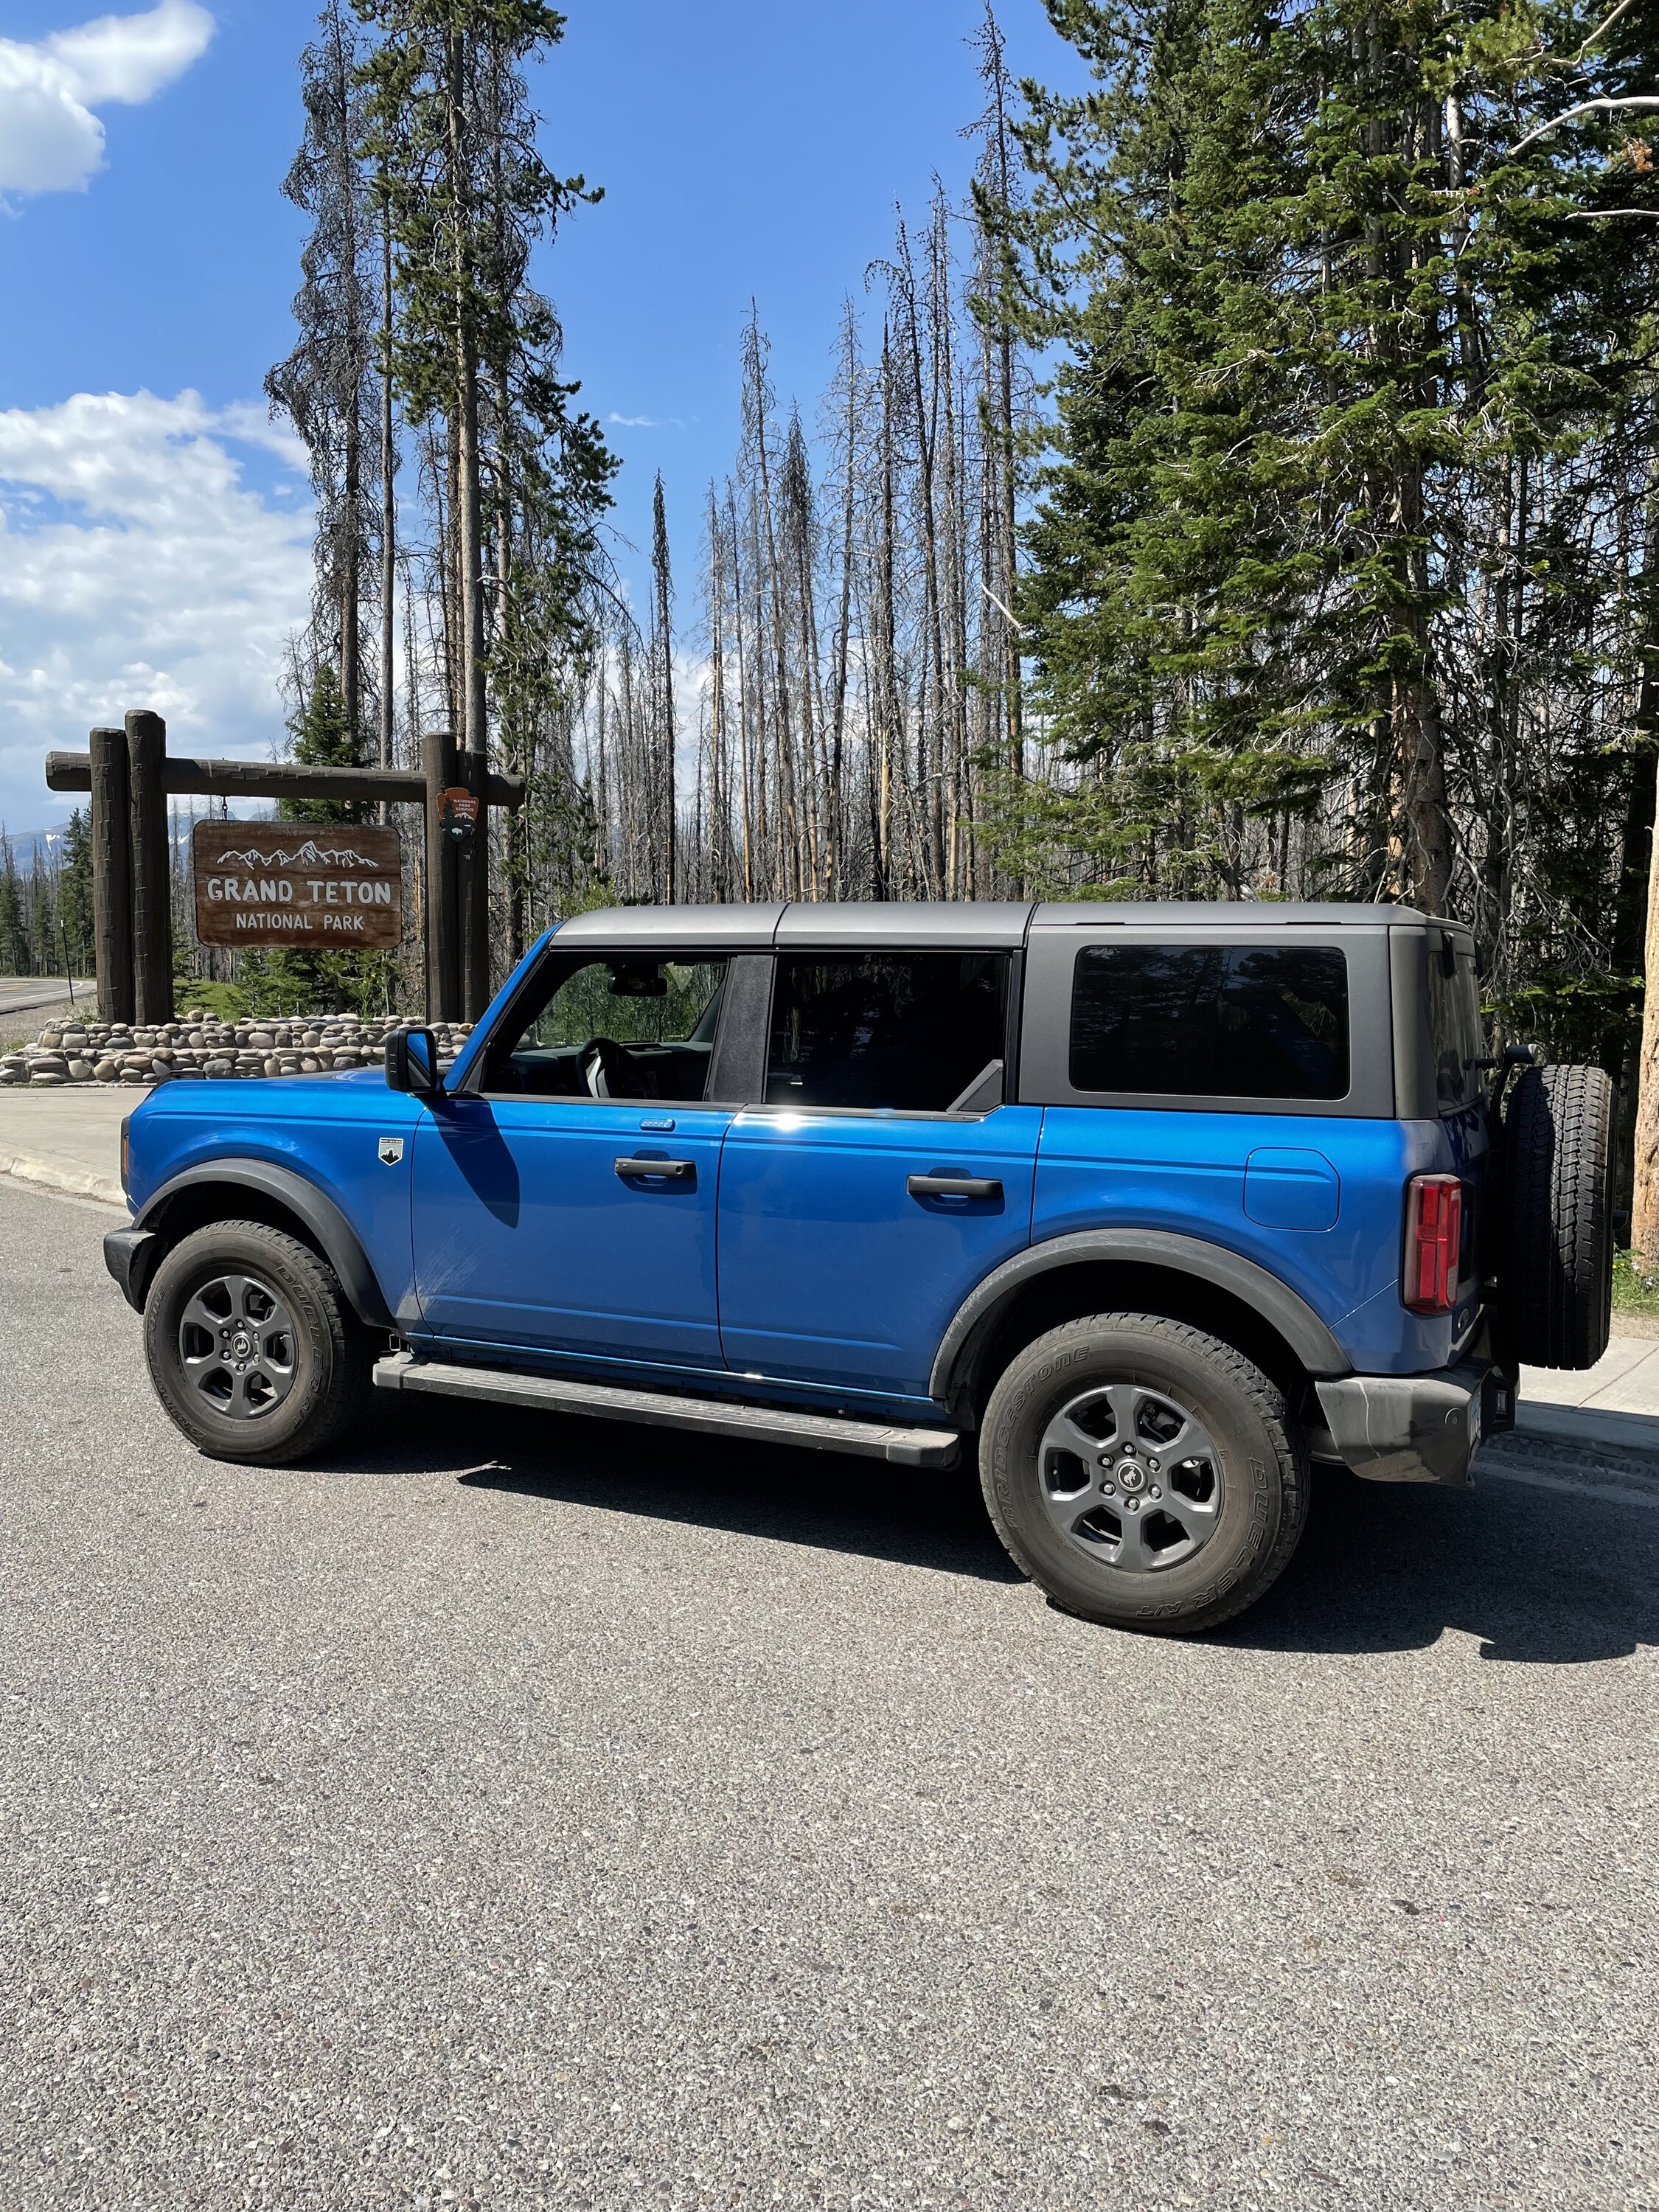 Ford Bronco Family Road Trip to Yellowstone via Bronco Turns into Quite an Adventure DAC7CE9A-C7DC-4C90-80D1-707ED89FAA9D